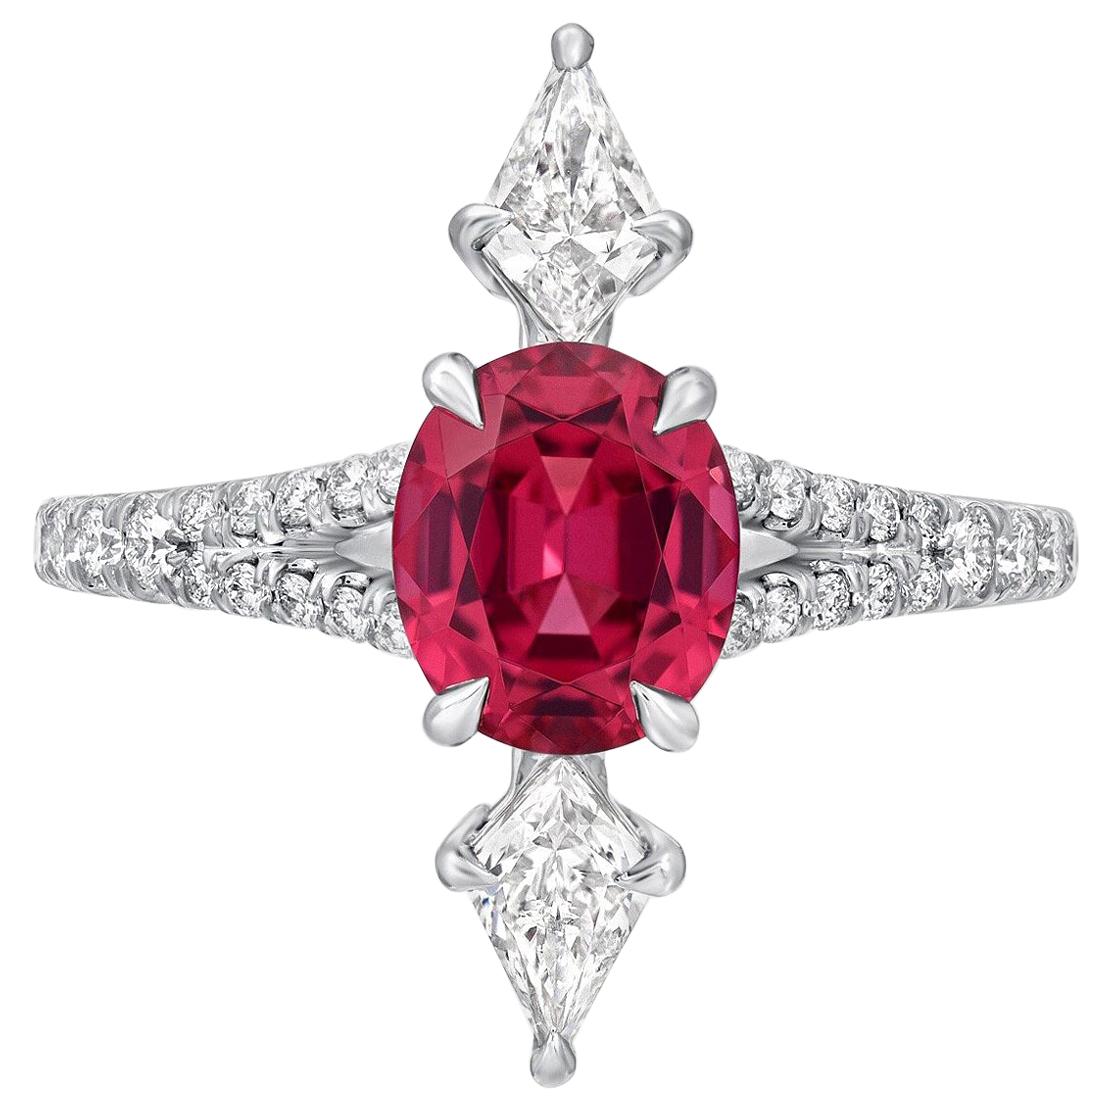 Pink Spinel Ring 1.47 Carat Oval